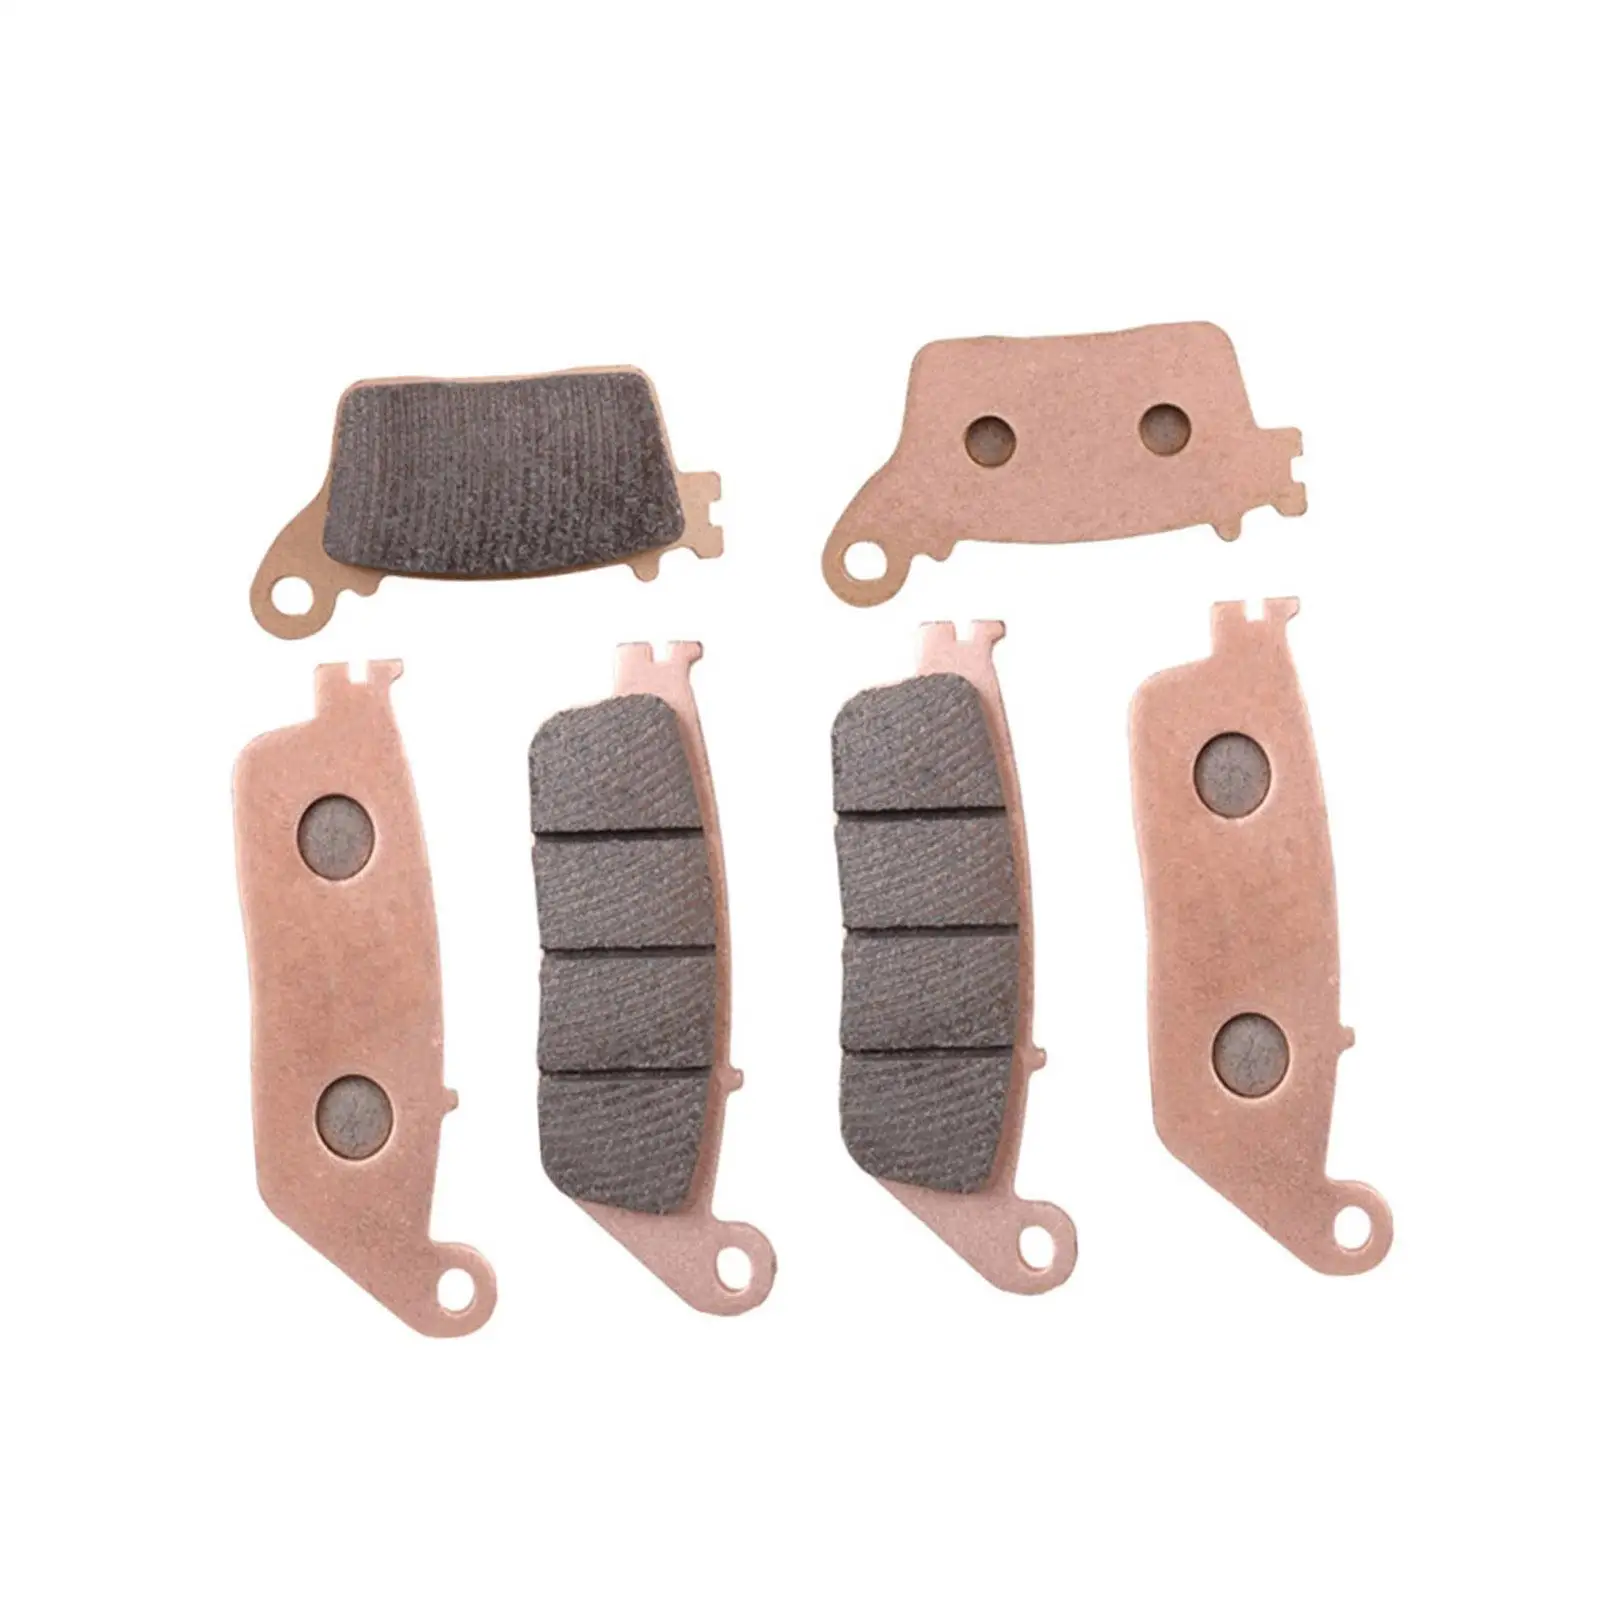 6 Pieces Front and Rear Brake Pads Set Brake Pads Set for Honda Hornet Easy to Install High Performance Repair Part